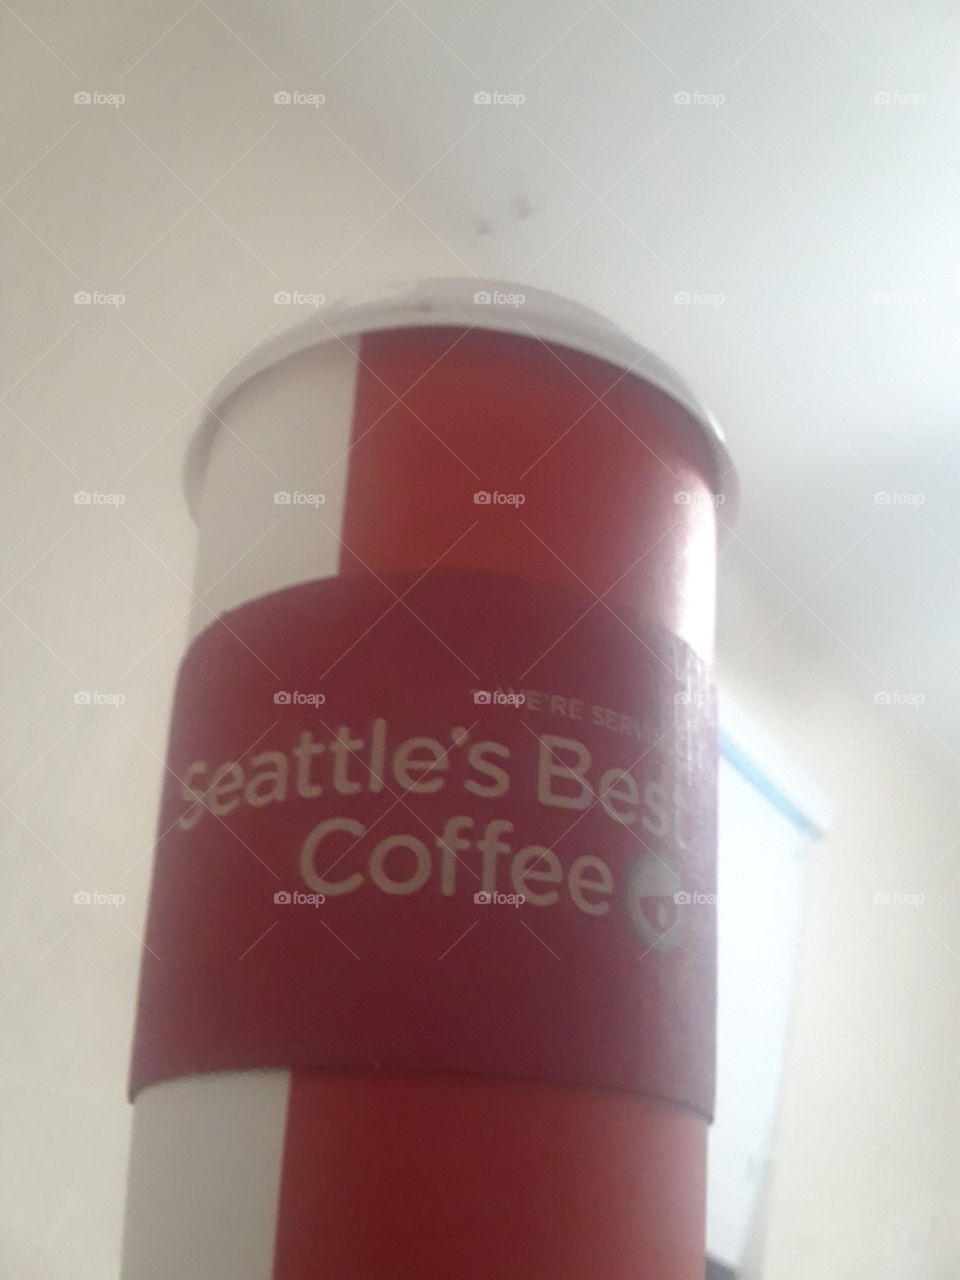 Best coffee. vanilla with cream and sugar.Wake up in the morning.Get your blood going.Coffee lovers.Coffee beans.Growing out in the different countries.Love for coffee everyday.Seattle's best.